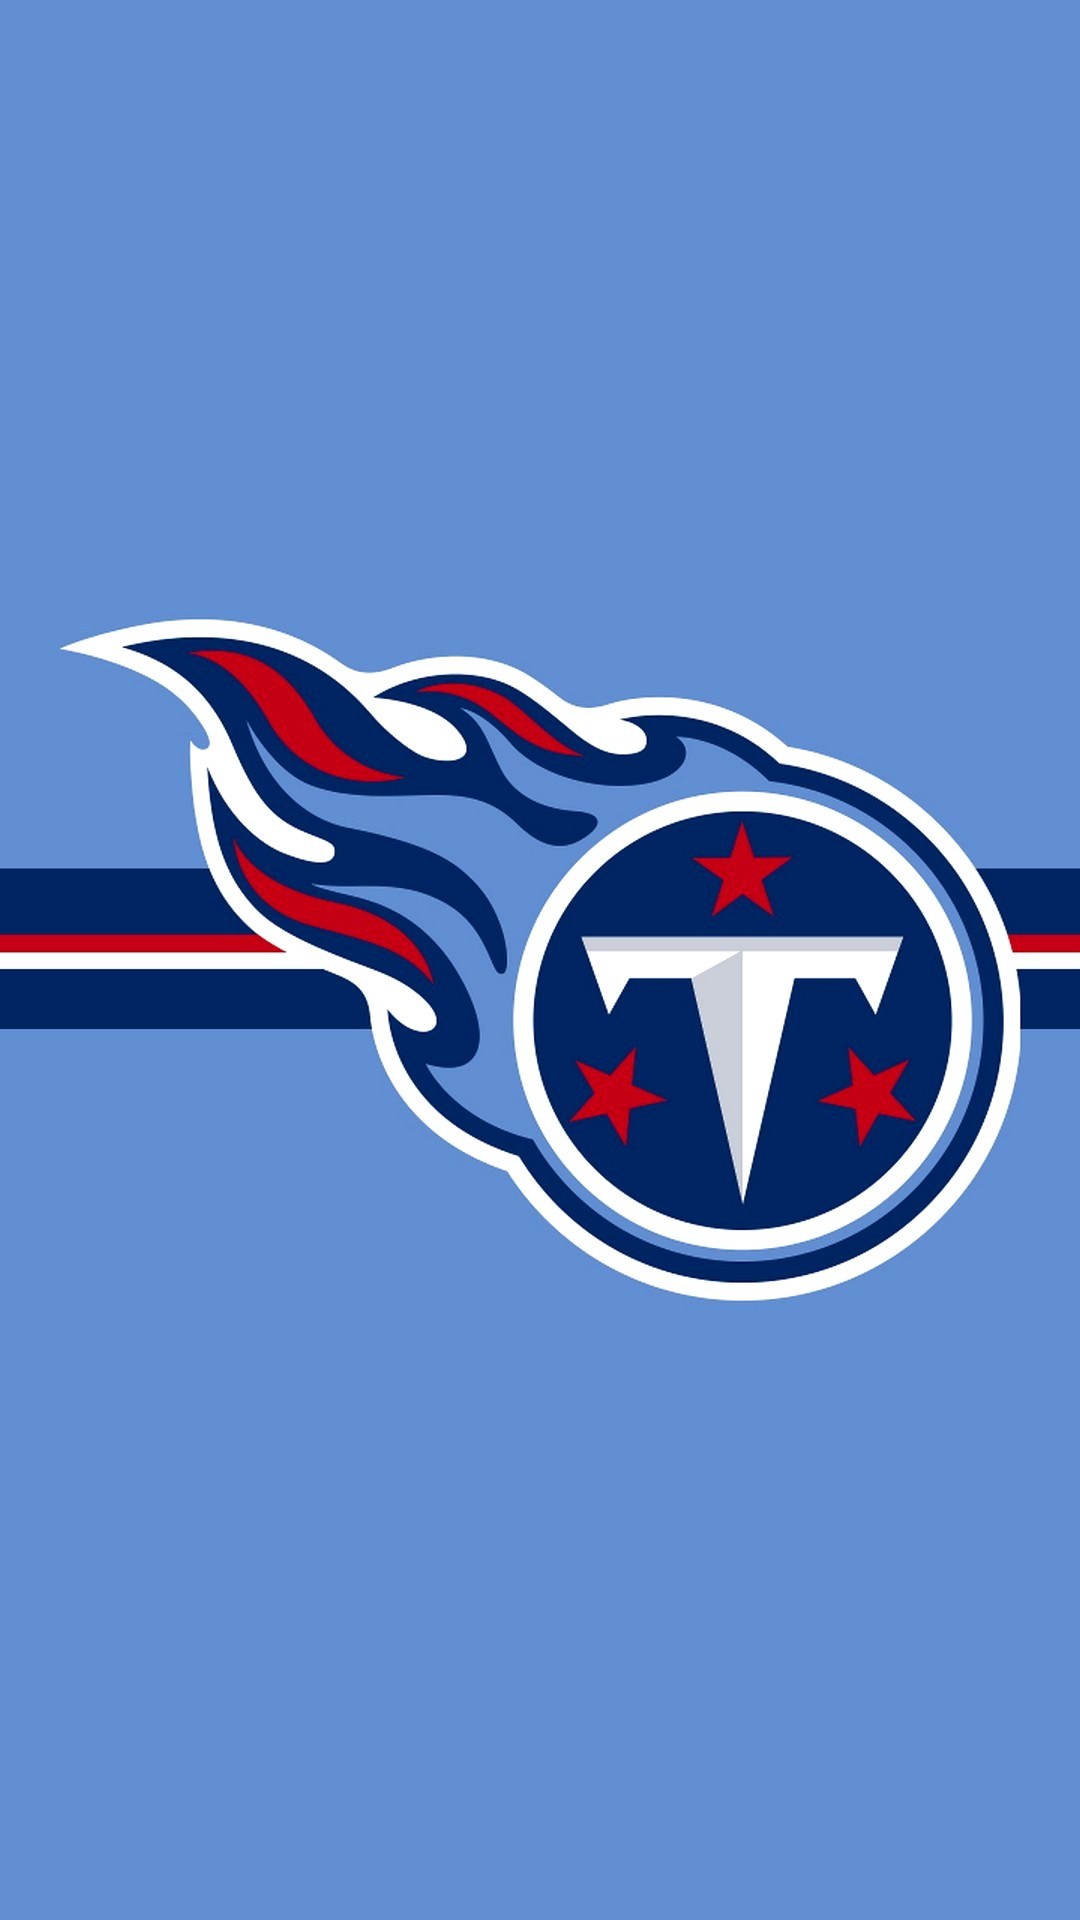 Tennessee Titans Wallpaper Mobile With high-resolution 1080X1920 pixel. You can use and set as wallpaper for Notebook Screensavers, Mac Wallpapers, Mobile Home Screen, iPhone or Android Phones Lock Screen